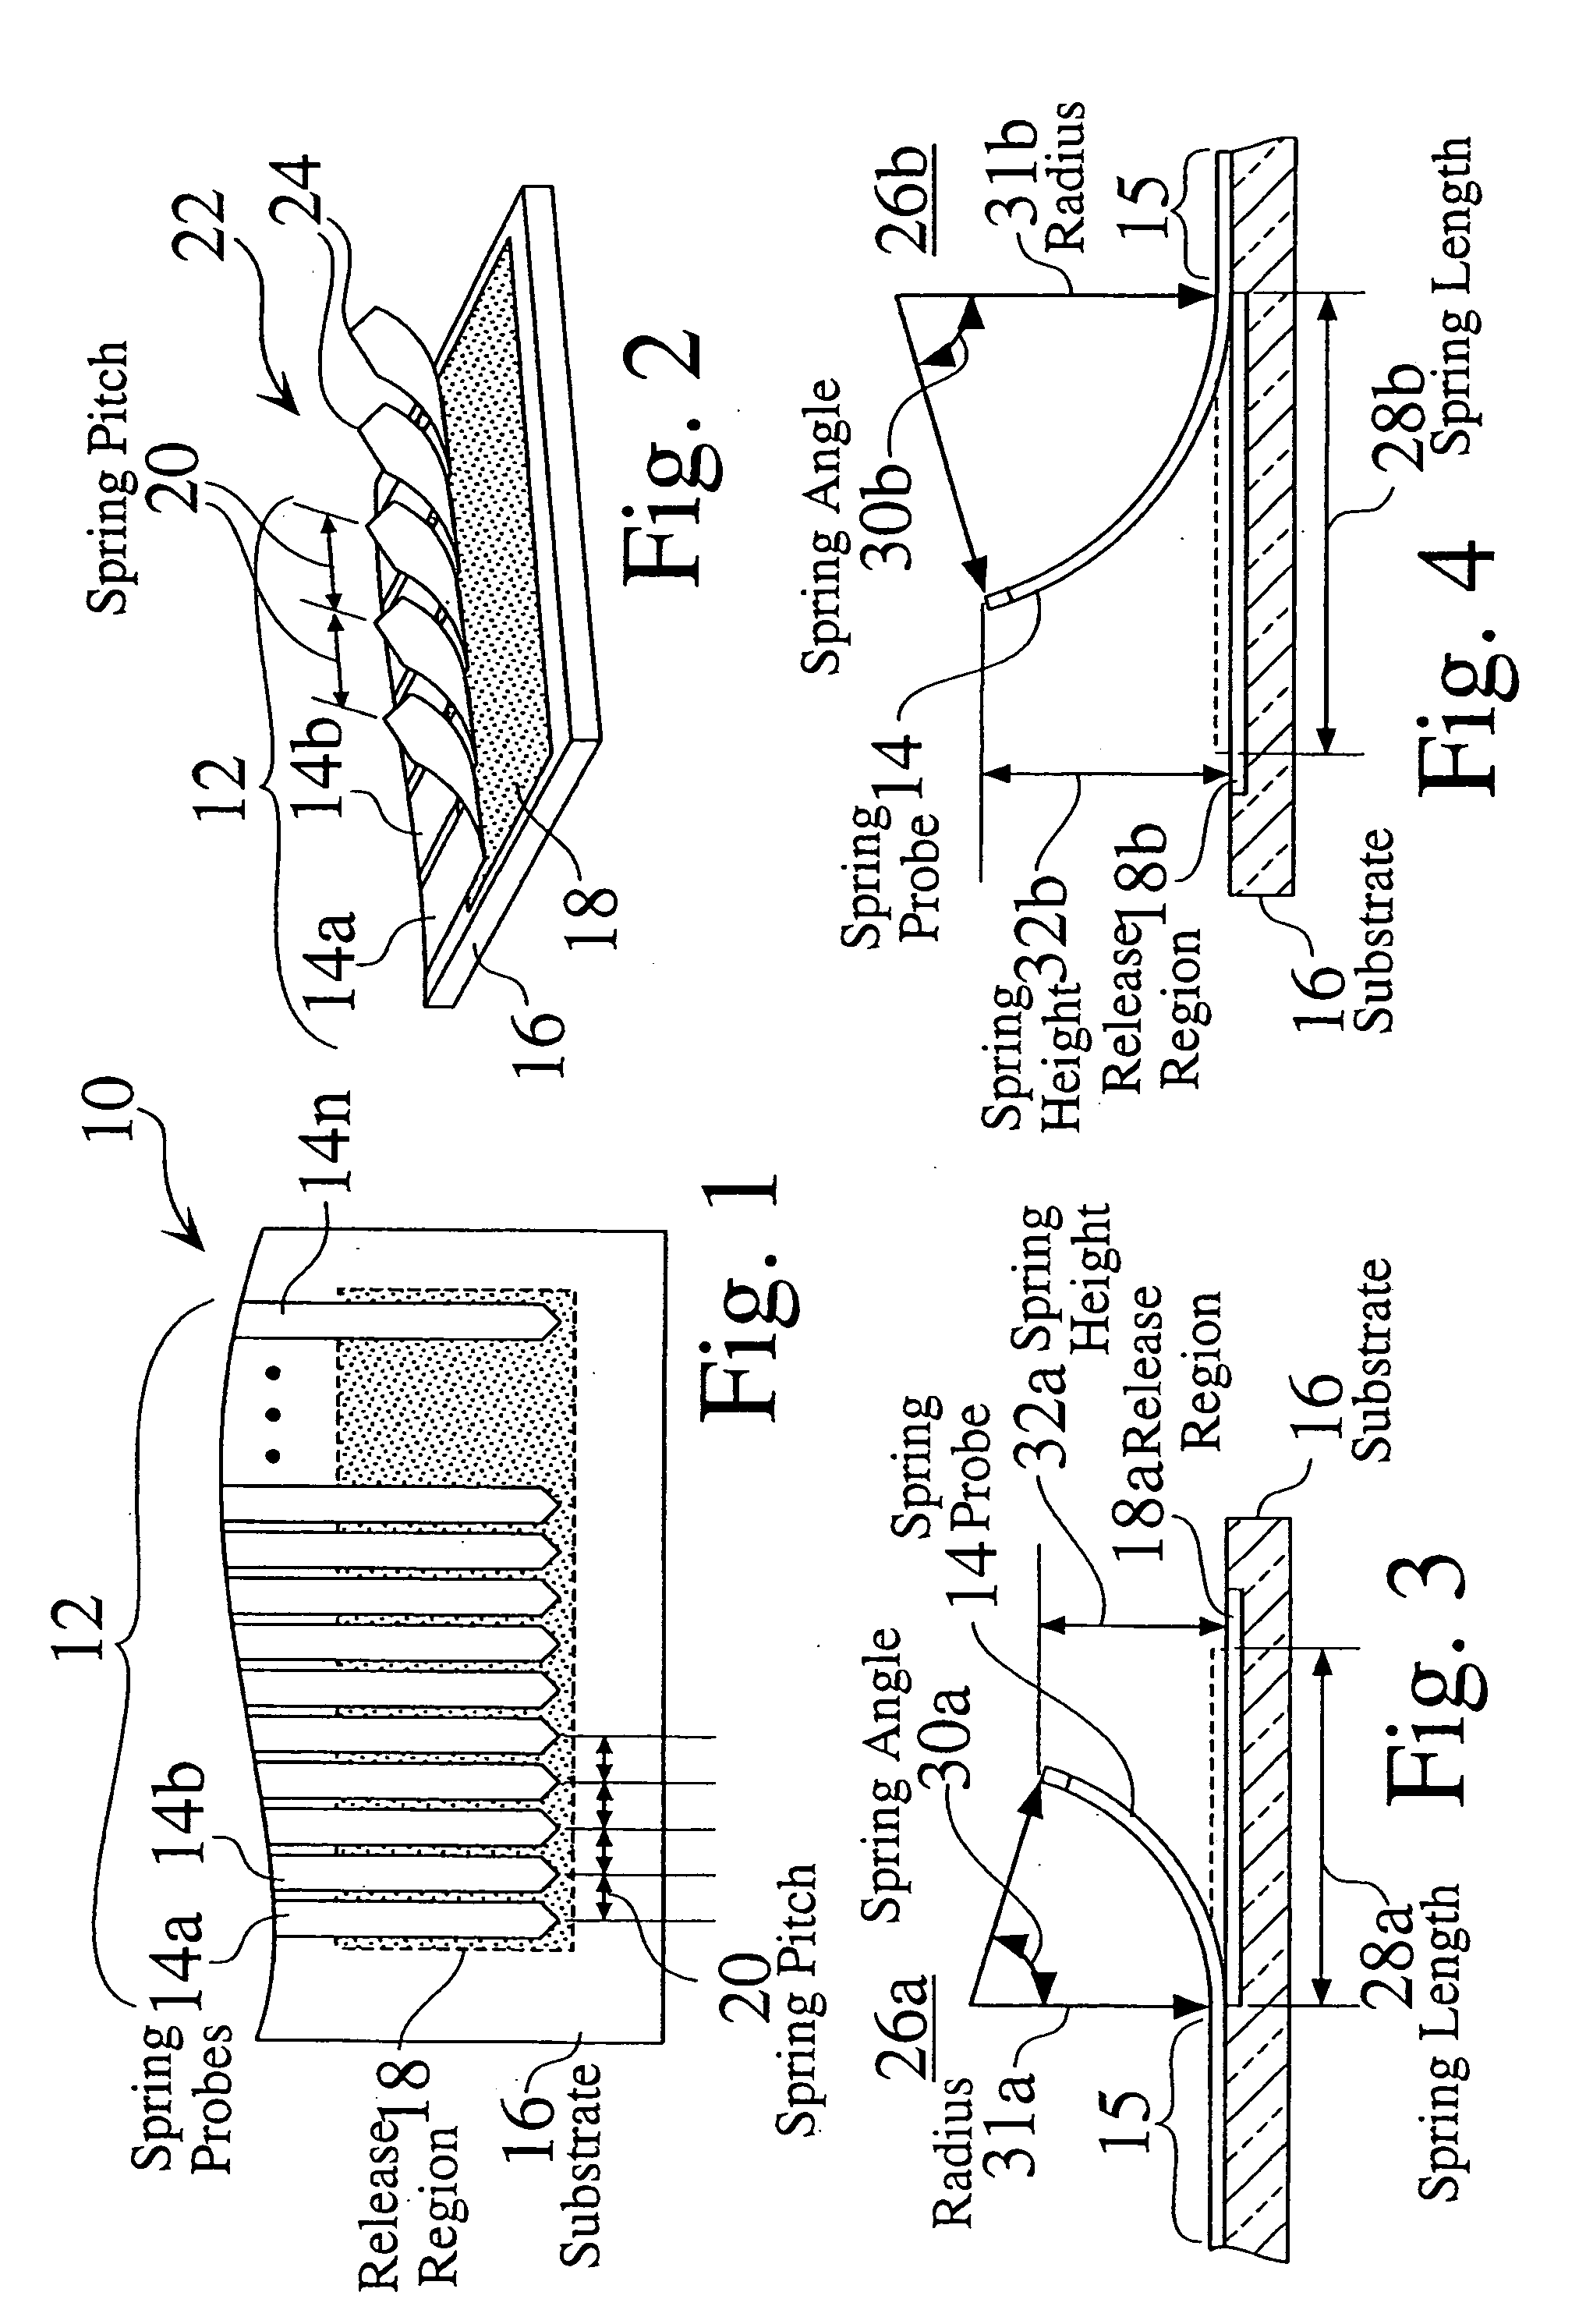 Systems for testing and packaging integrated circuits